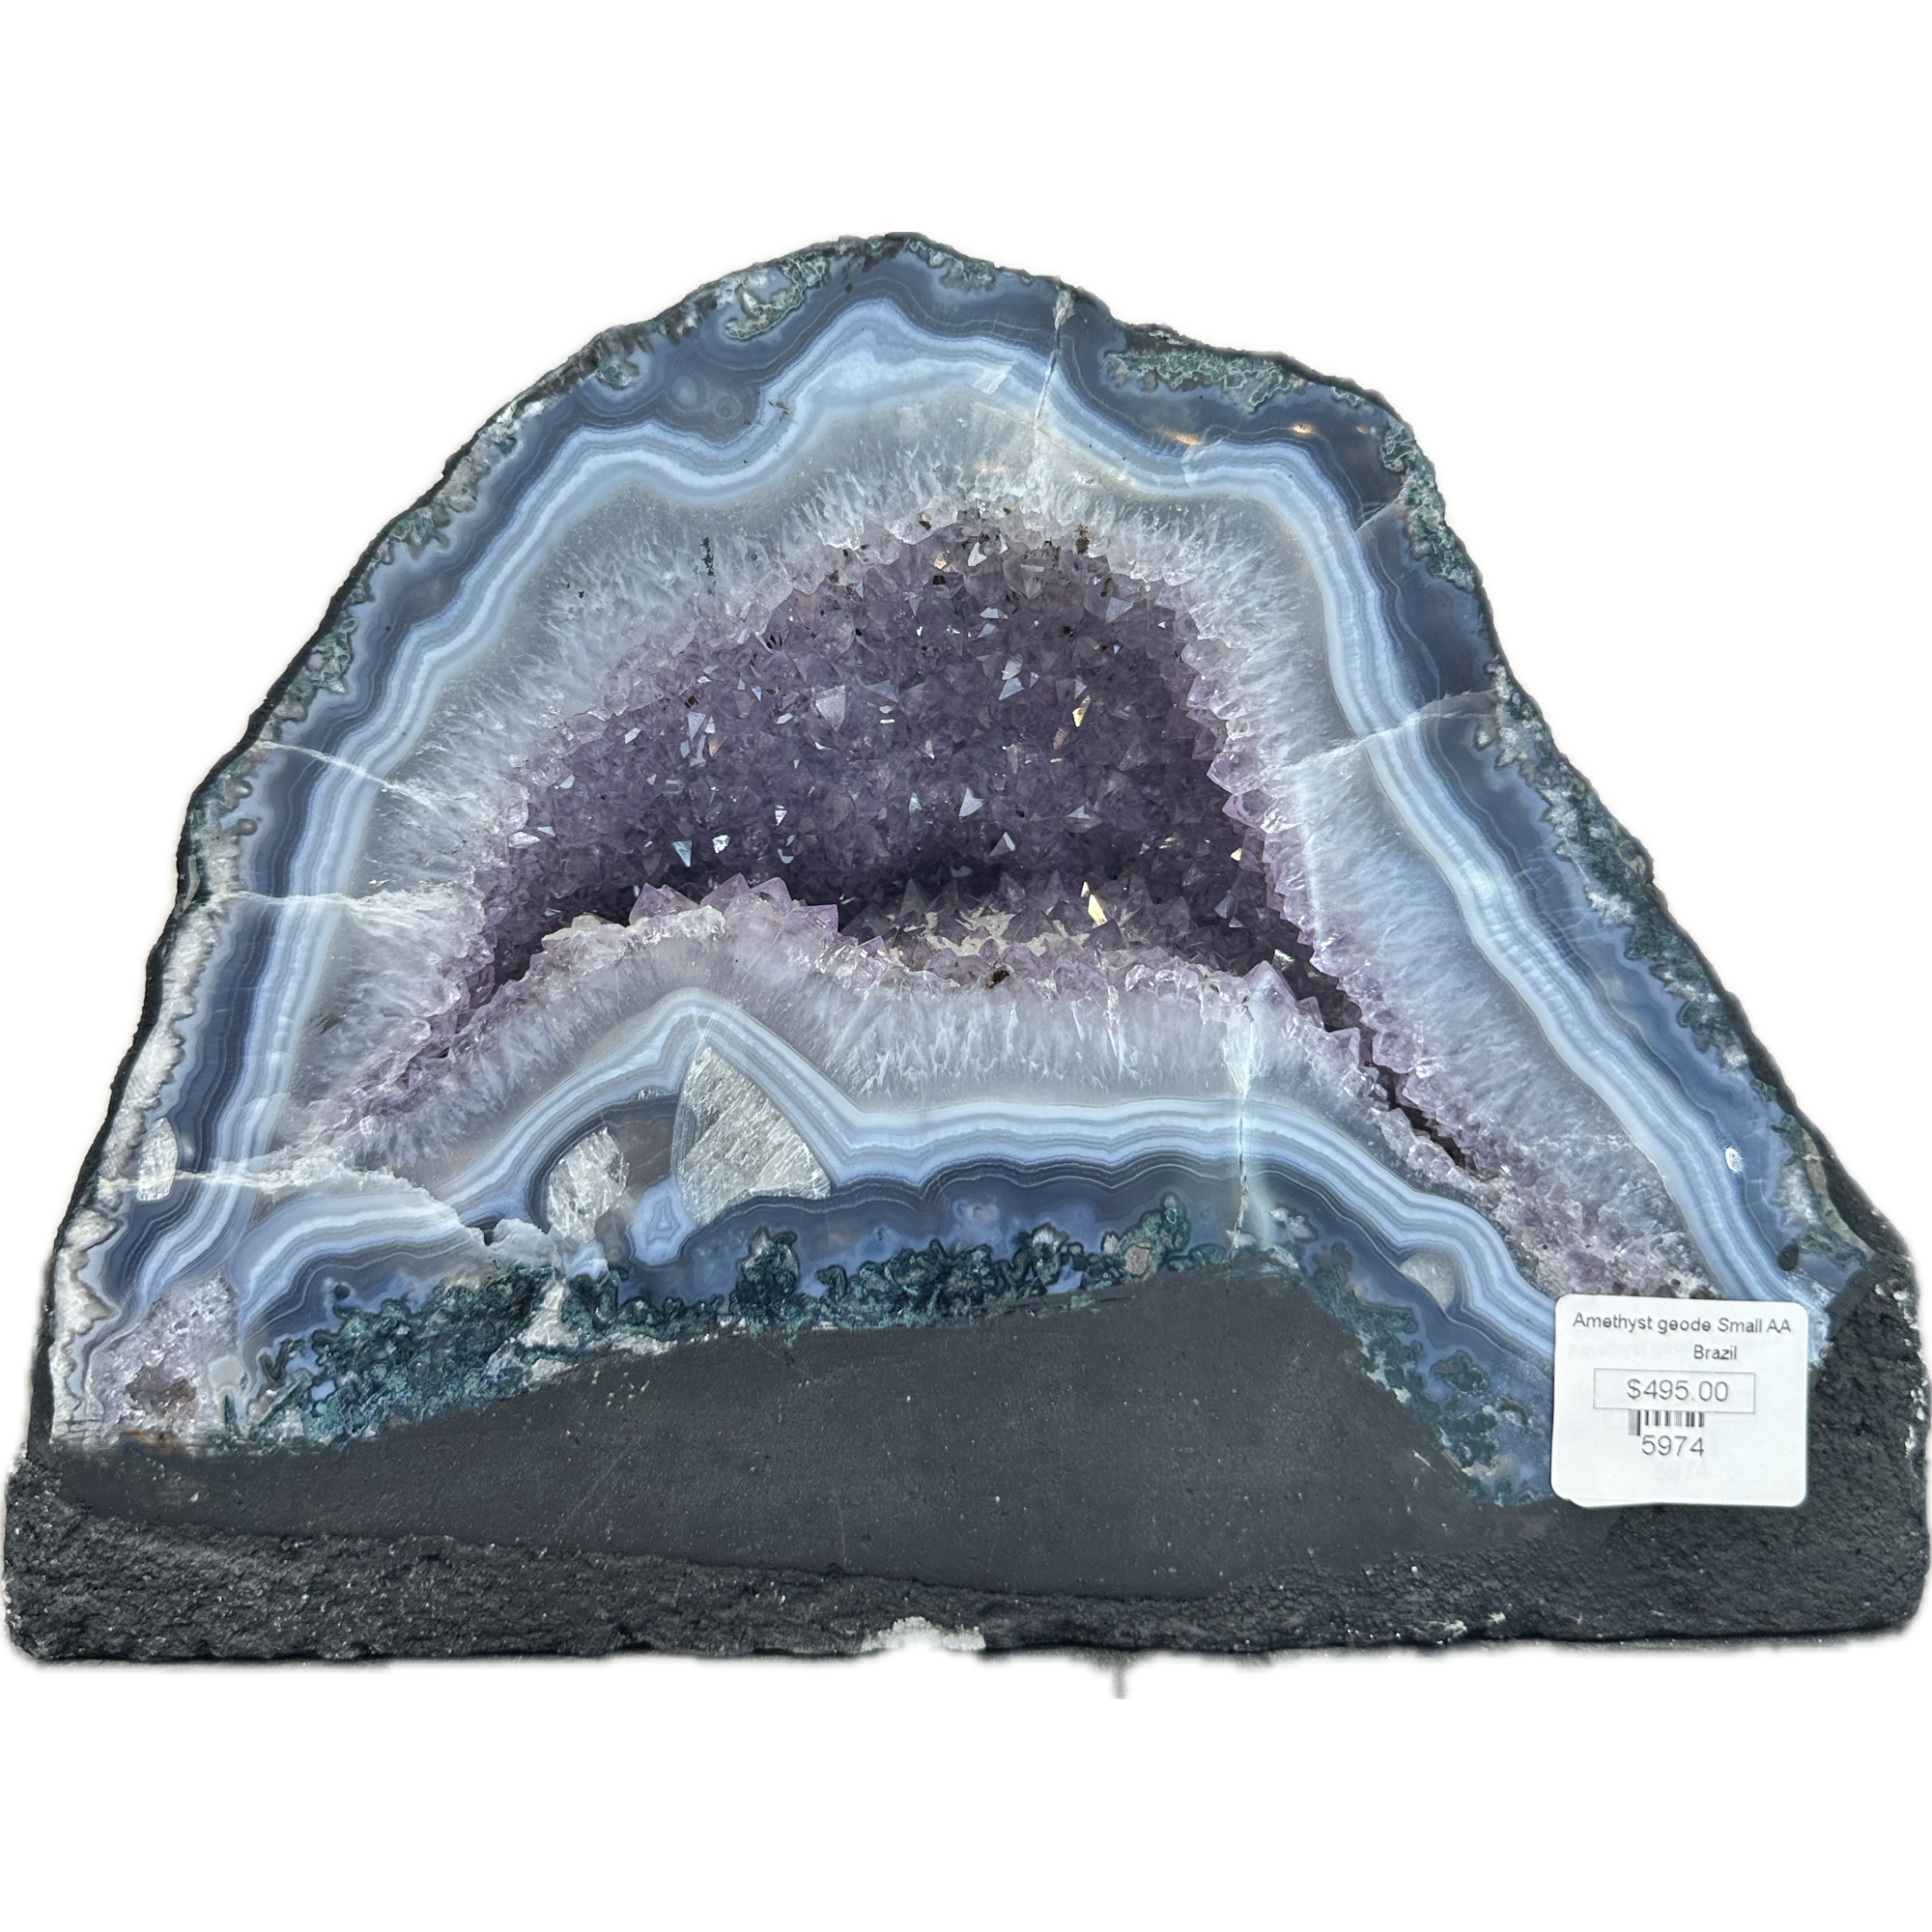 Amethyst Cathedral mini cave Prehistoric Online